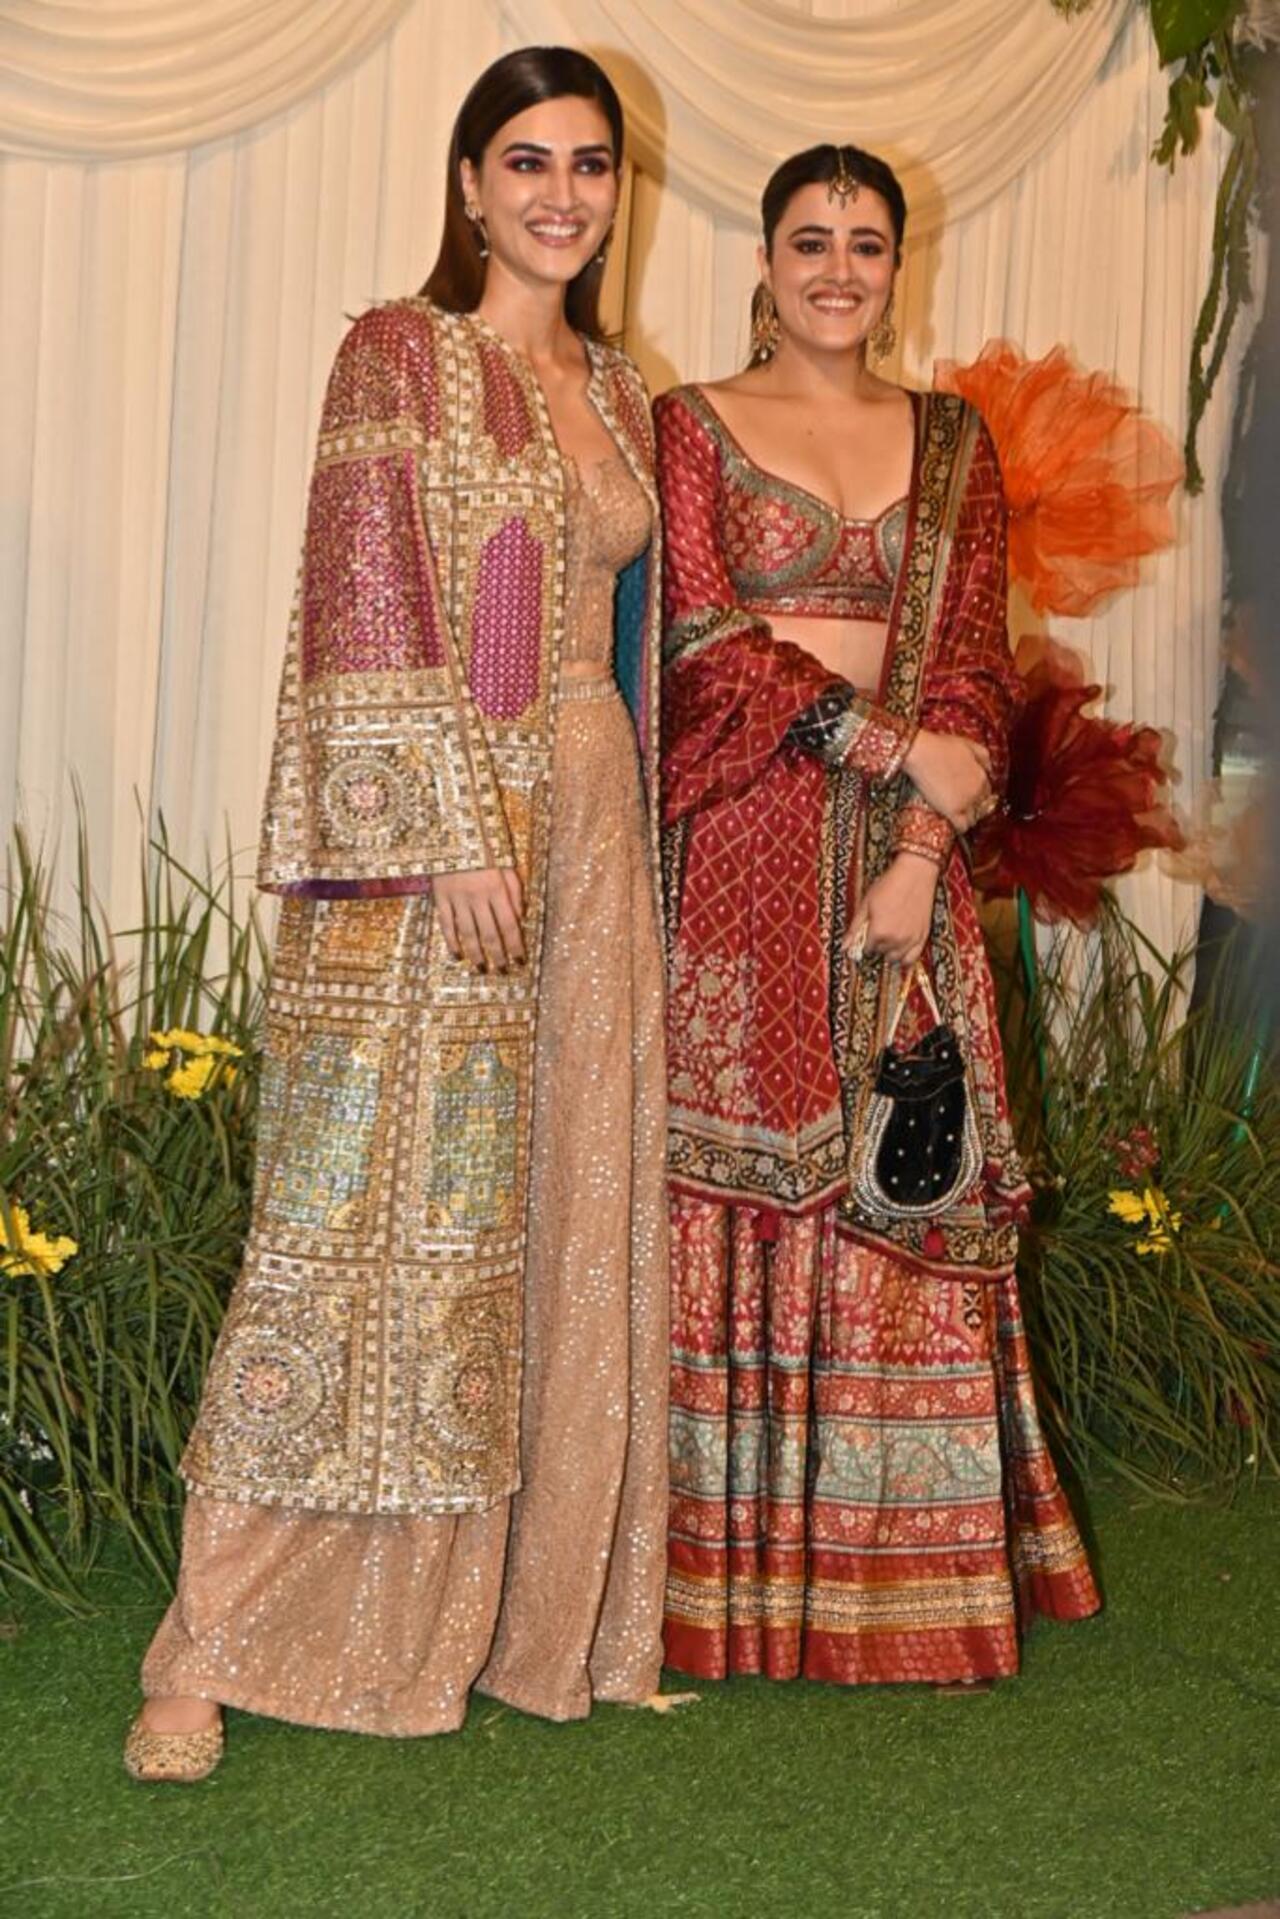 The Sanon sisters looked royal in this gorgeous outfits for the Diwali party at Shilpa Shetty's residence